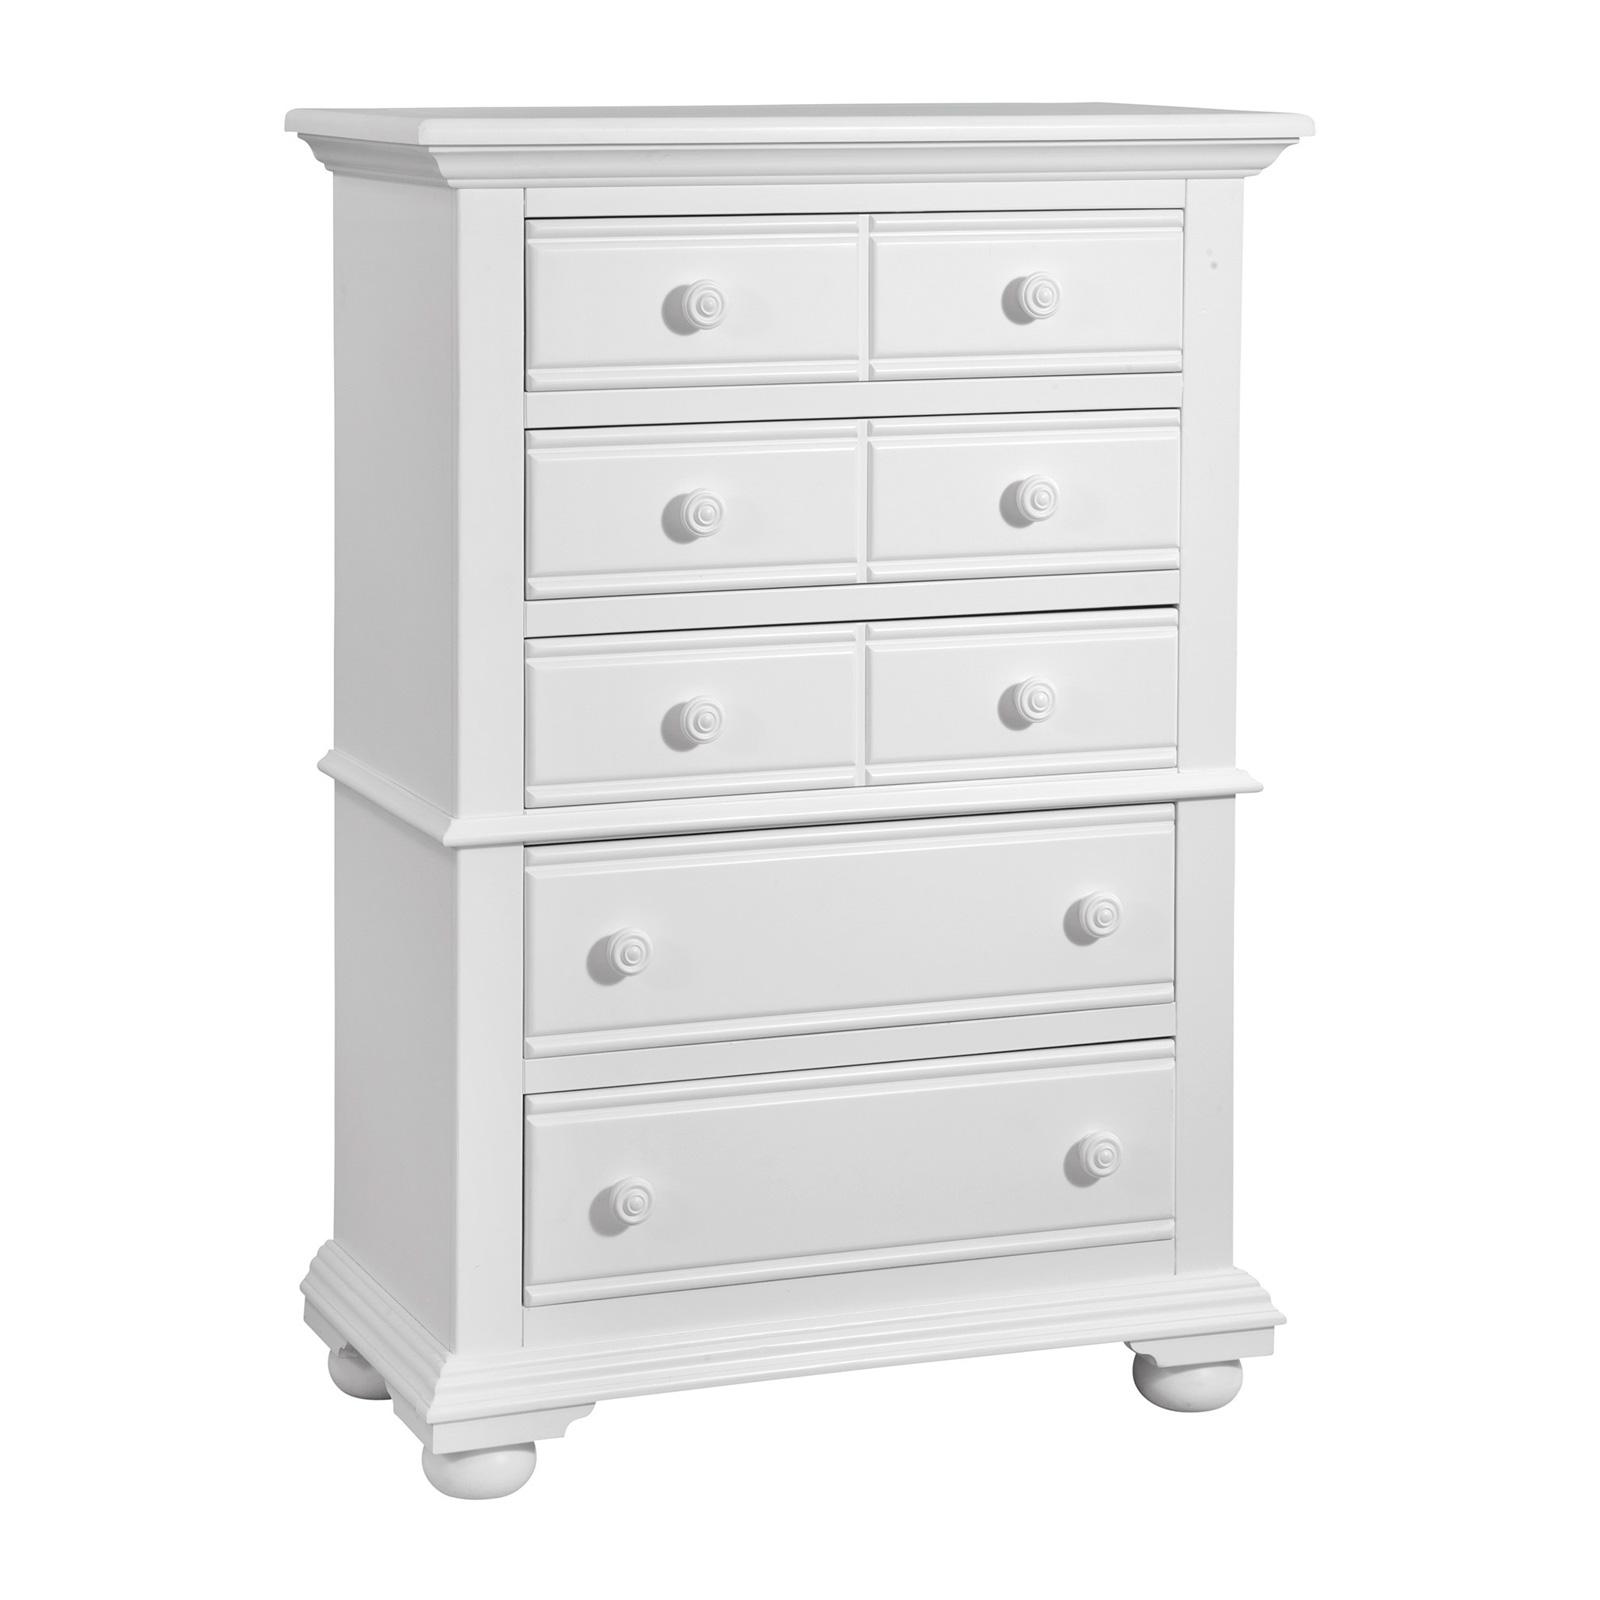 Classic, Traditional, Cottage Chest COTTAGE 6510-150 6510-150 in White 